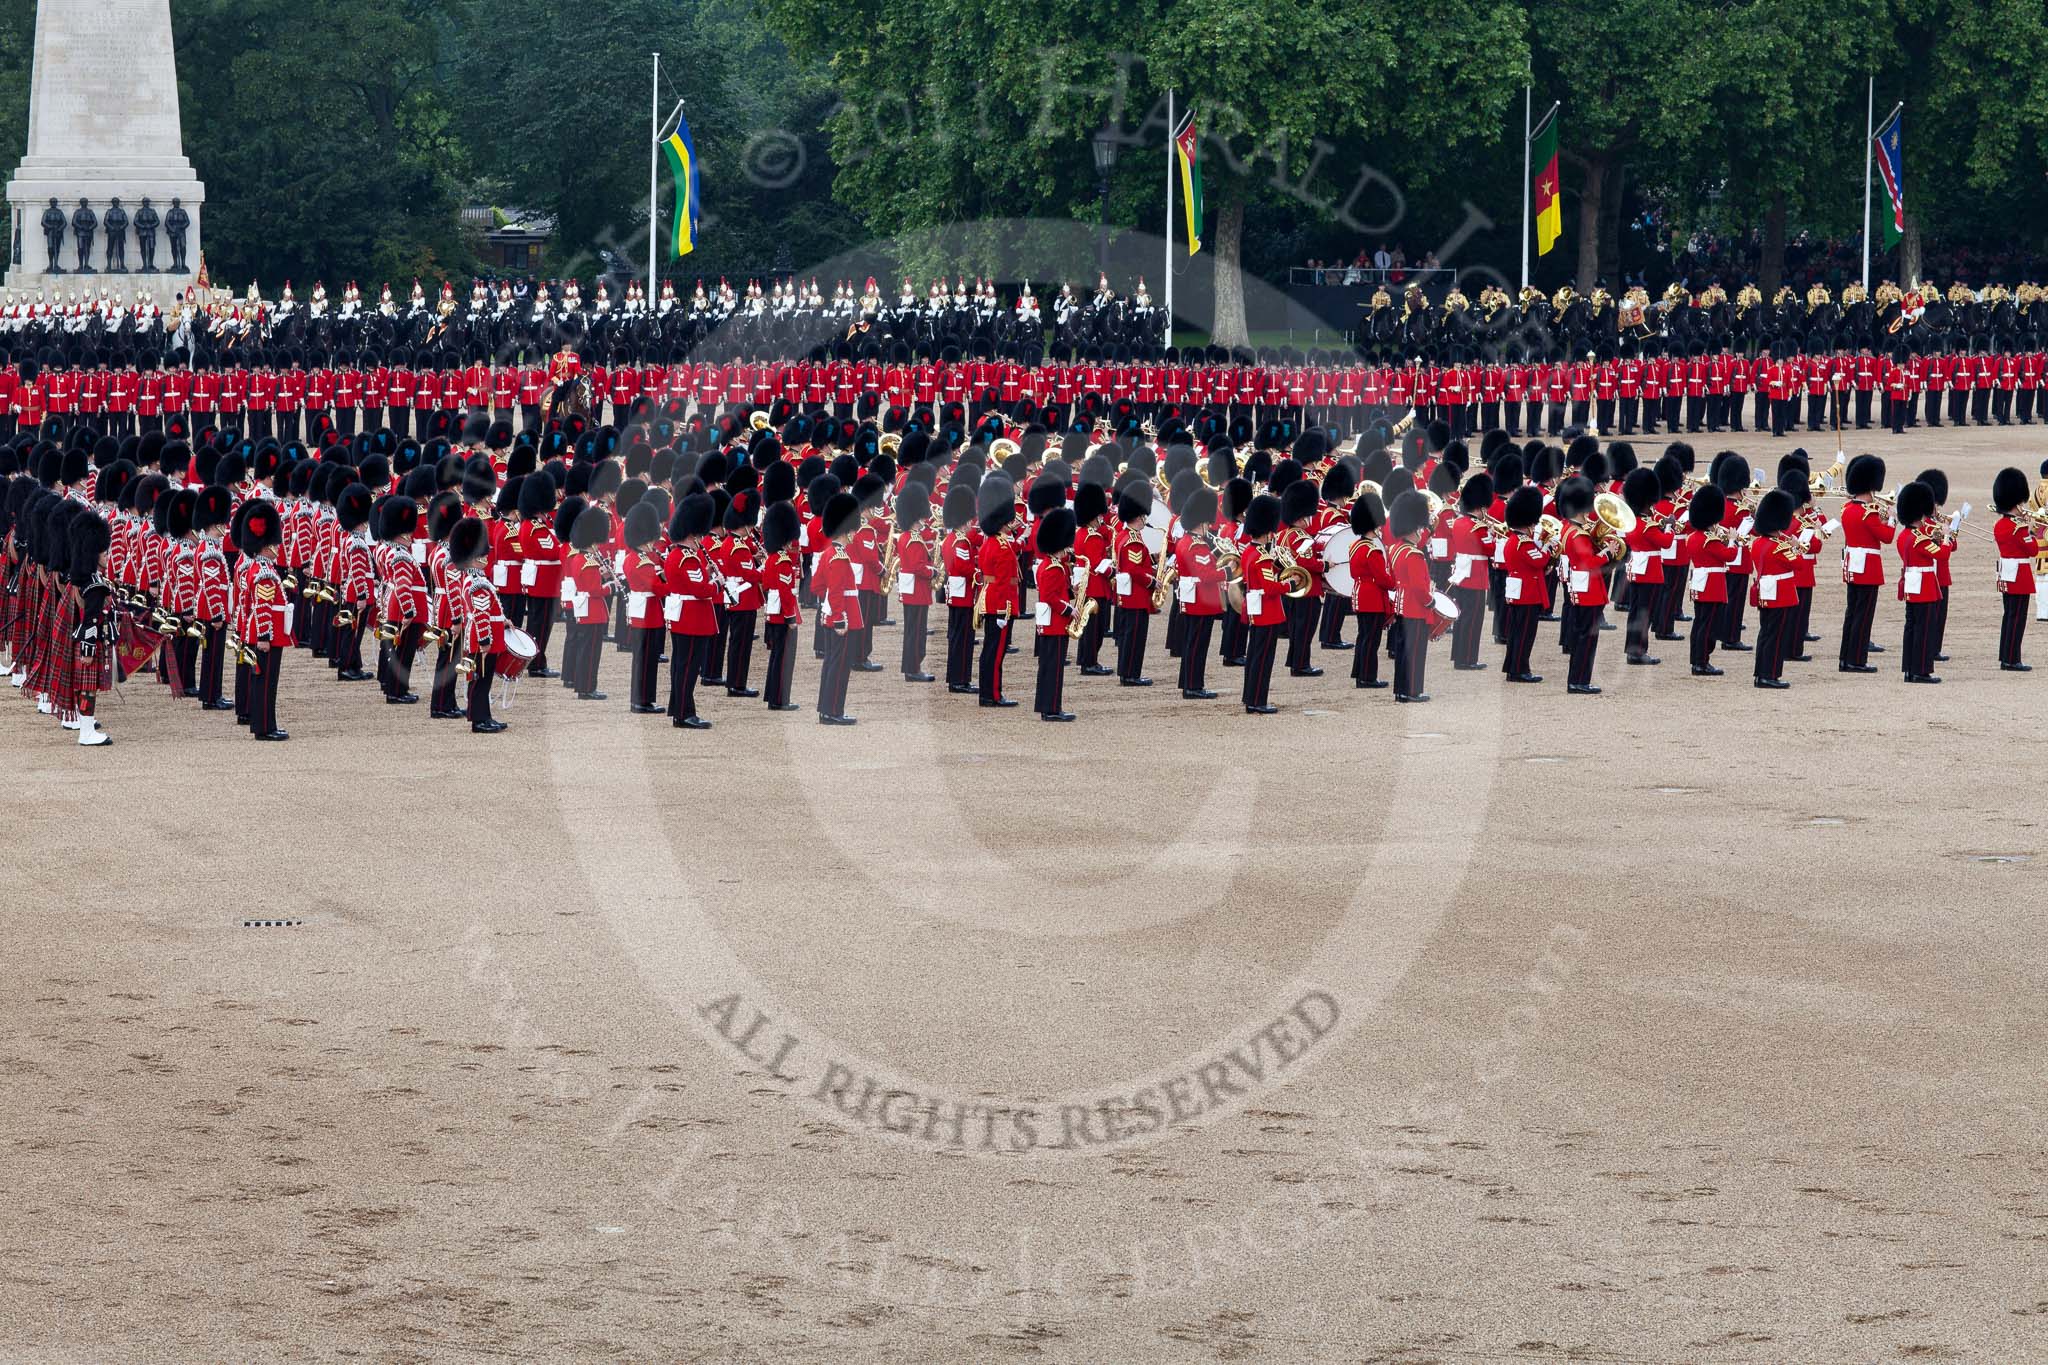 Trooping the Colour 2011: The Massed Bands playing, lead by the drum majors, during the Massed Bands Troop..
Horse Guards Parade, Westminster,
London SW1,
Greater London,
United Kingdom,
on 11 June 2011 at 11:14, image #191